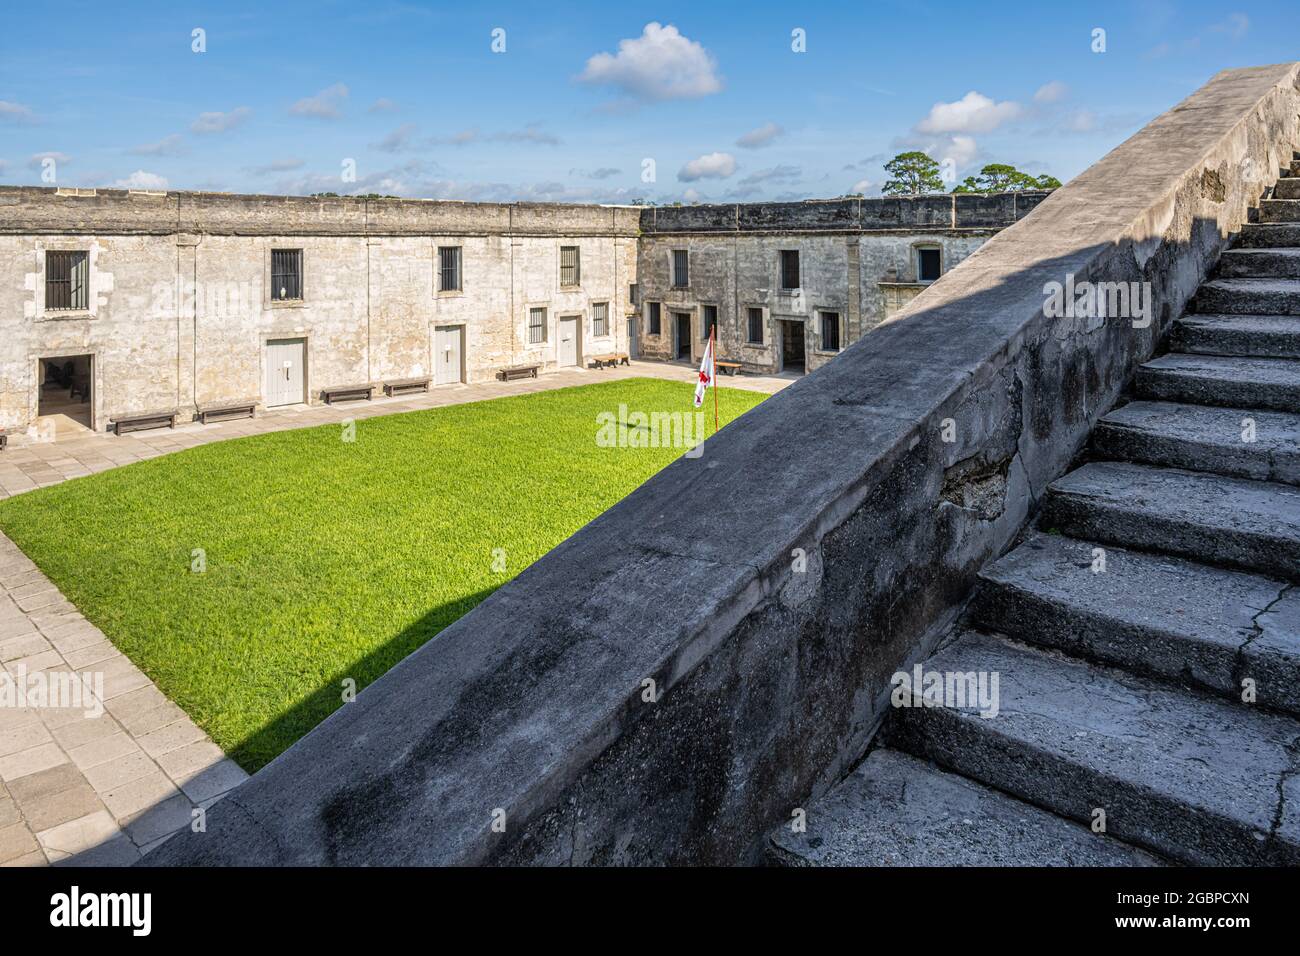 Plaza de Armas courtyard at Castillo de San Marcos, the oldest masonry fort in the continental US, on Matanzas Bay in St. Augustine, Florida. (USA) Stock Photo